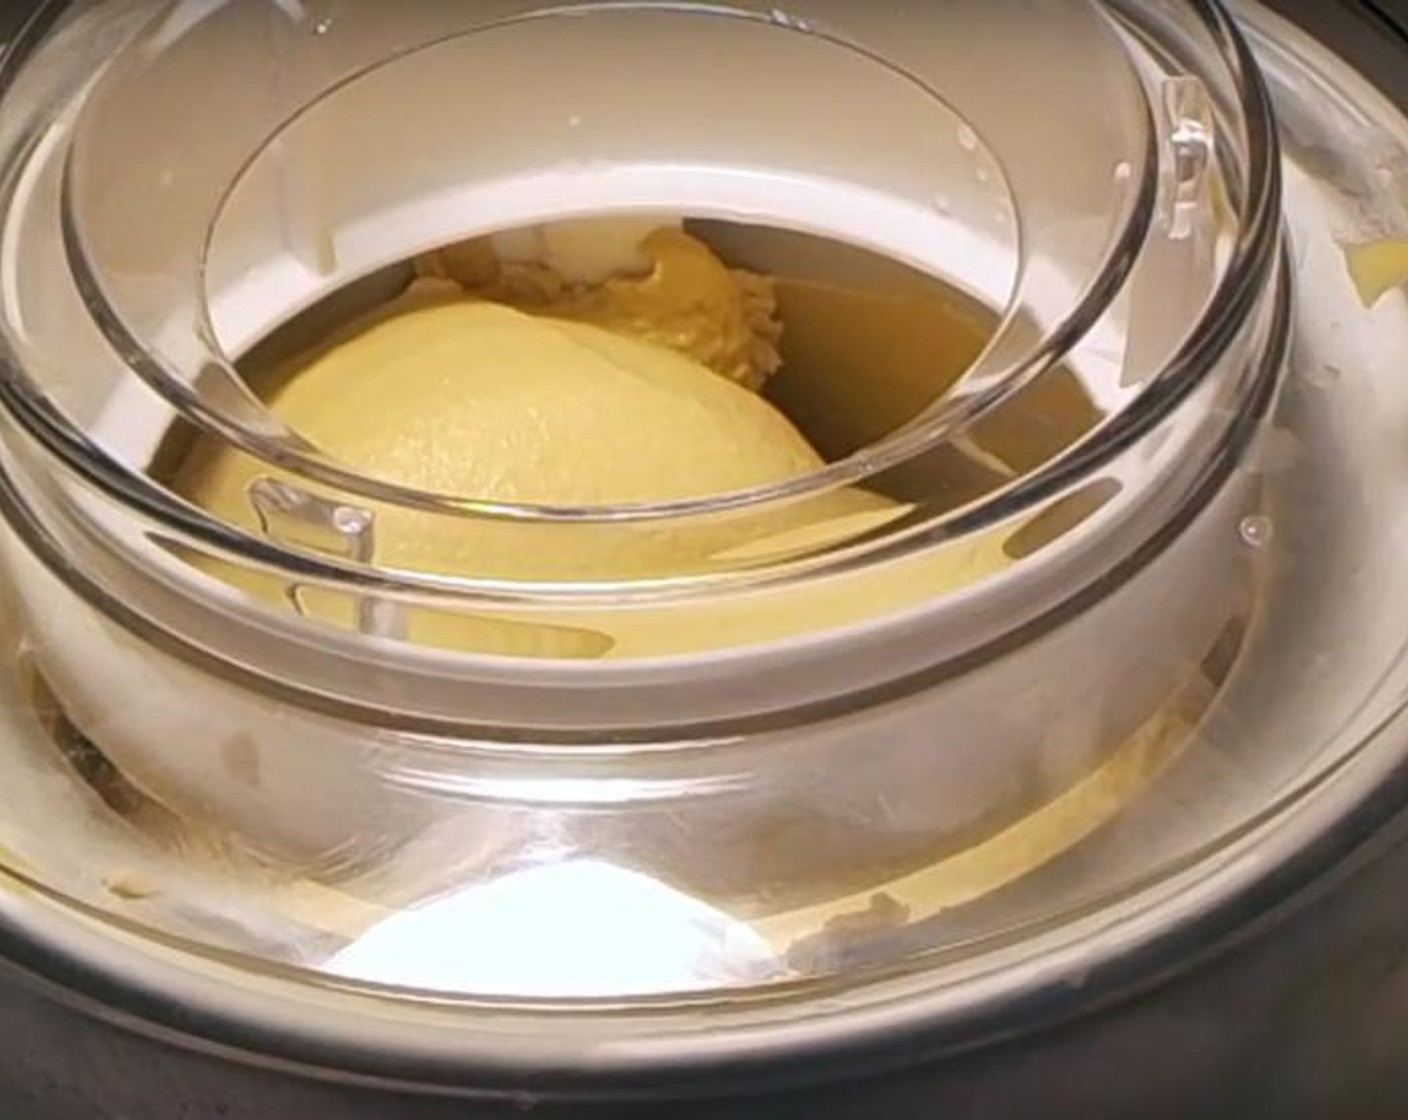 step 3 When the mixture has thickened, pour it into a bowl. Cover it and put it into the fridge to chill. Pour the chilled mixture into an ice cream maker. Let it go for about 20 minutes. For the last three to four minutes of the cycle, add Maraschino Cherry (3/4 cup).